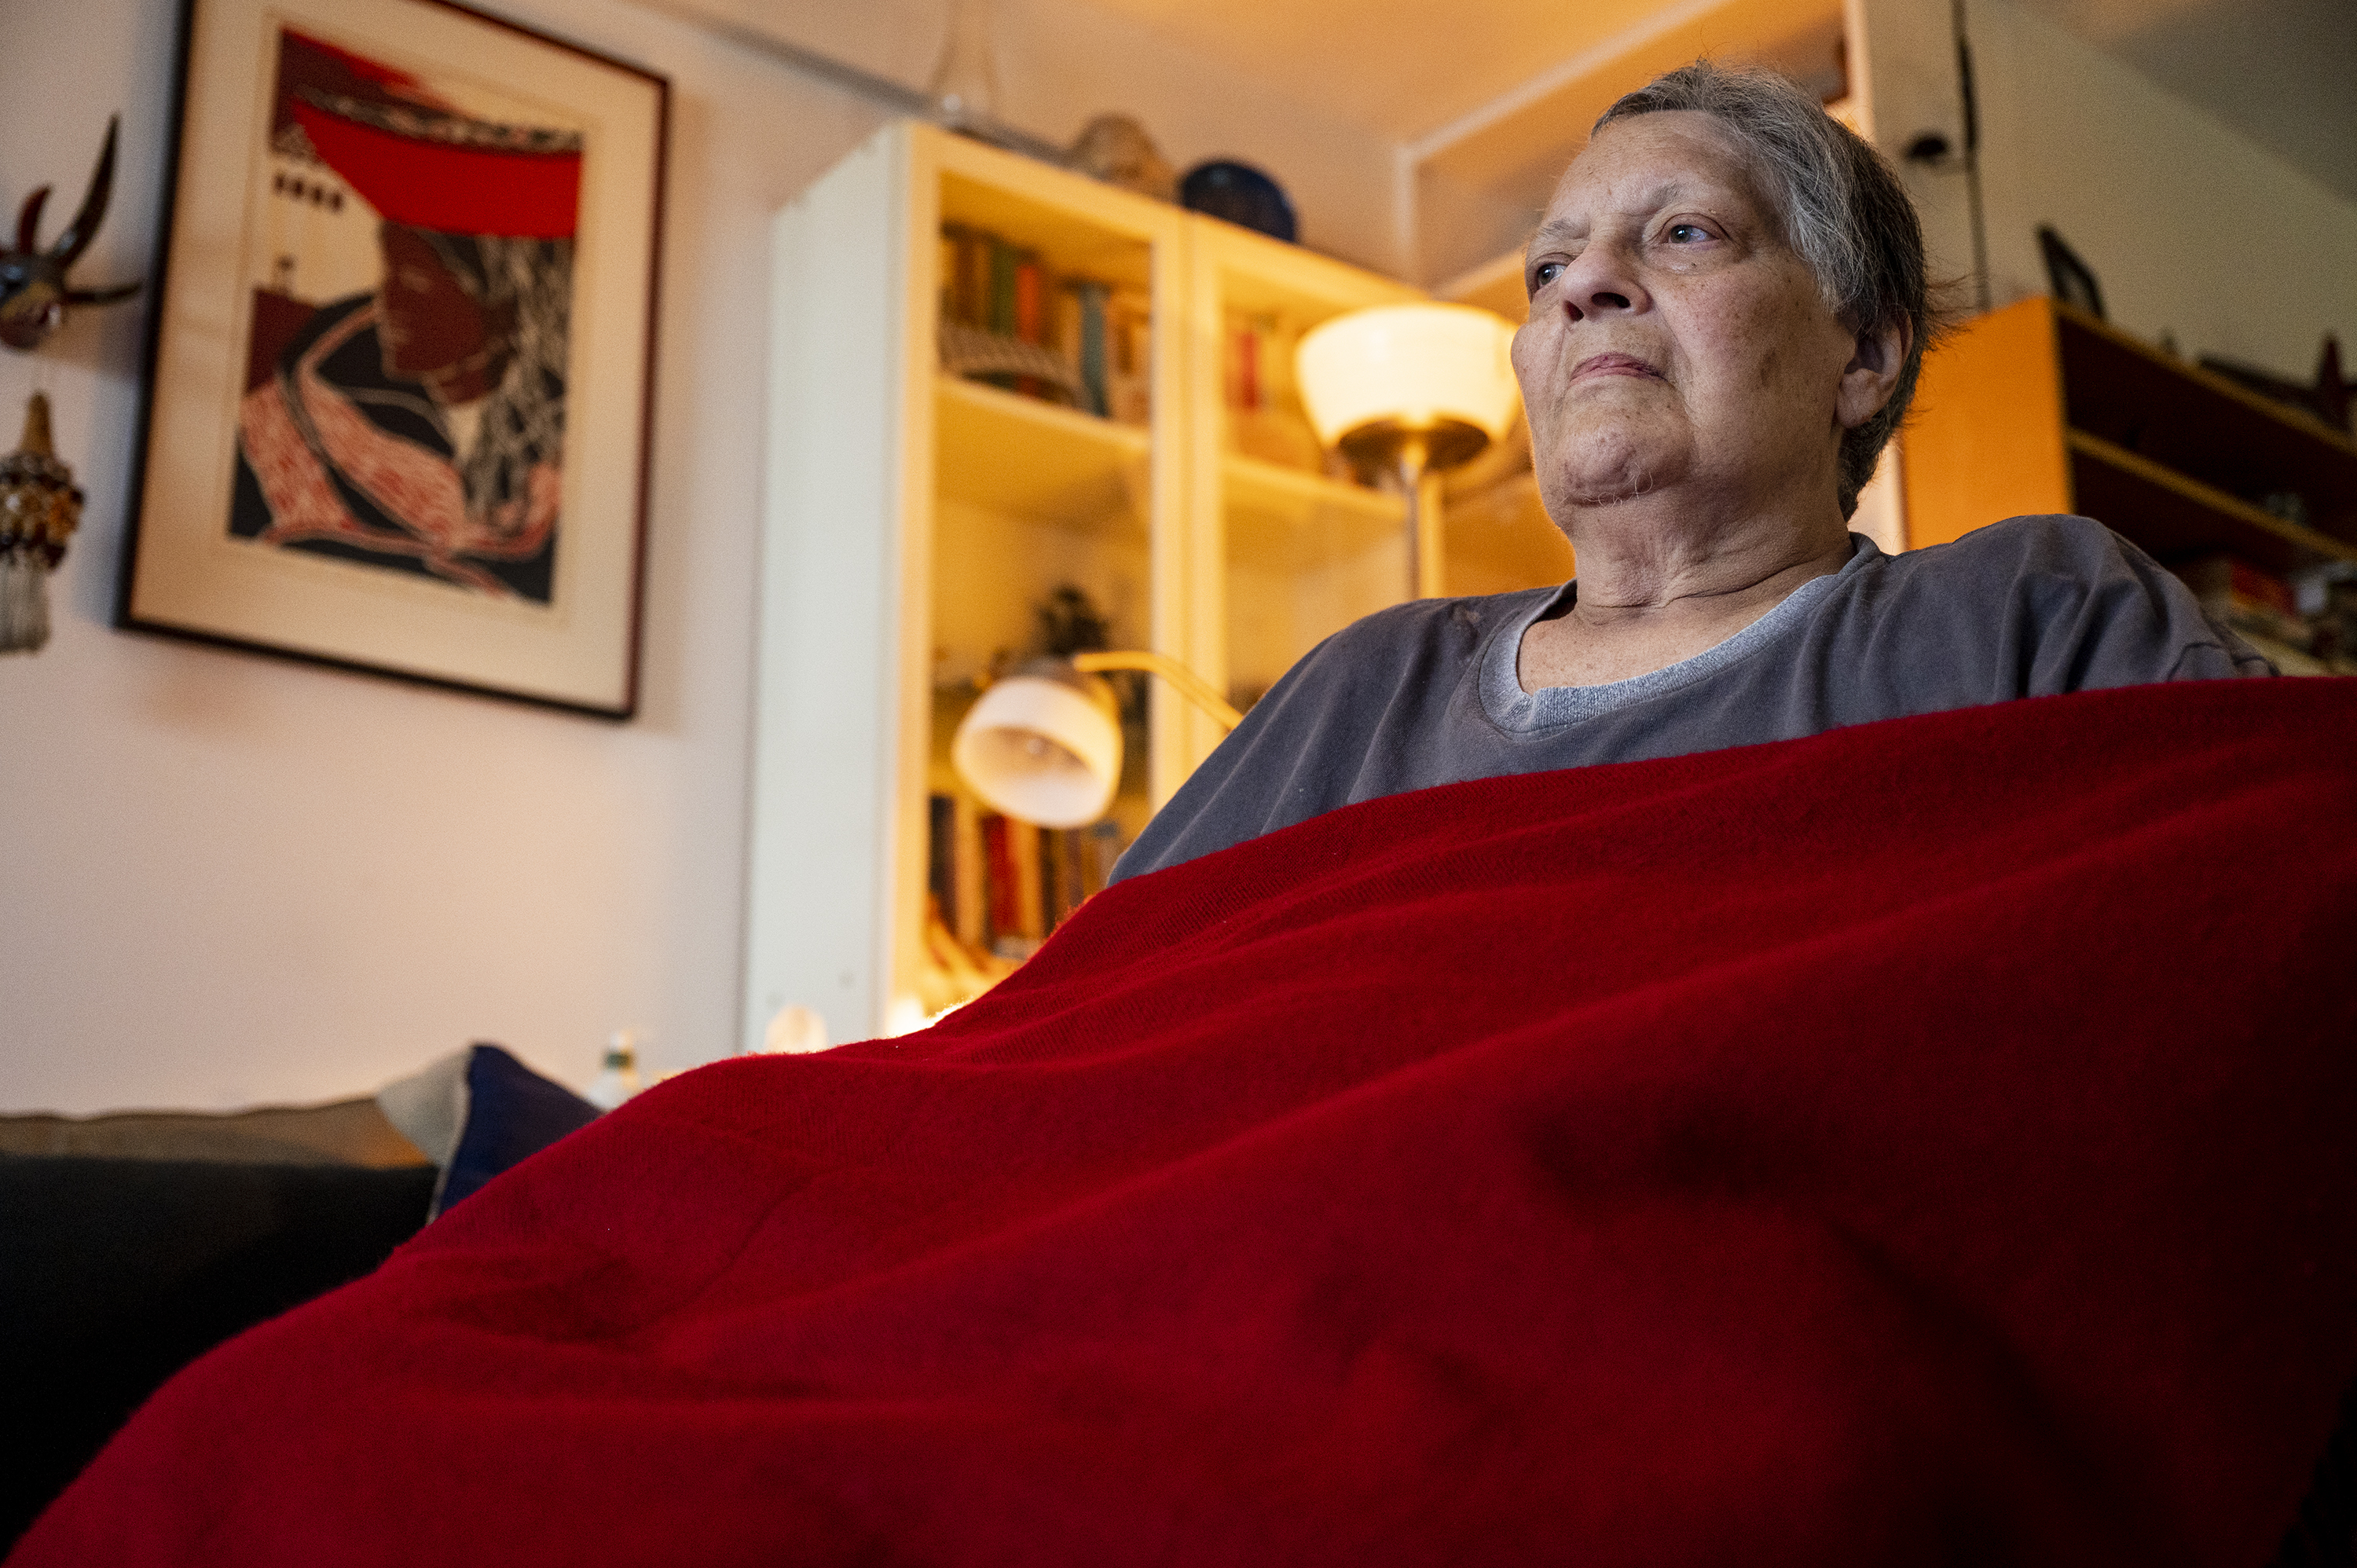 Roberta Singer sits inher Southbridge Towers apartment in Downtown Manhattan after being discharged from VillageCare.